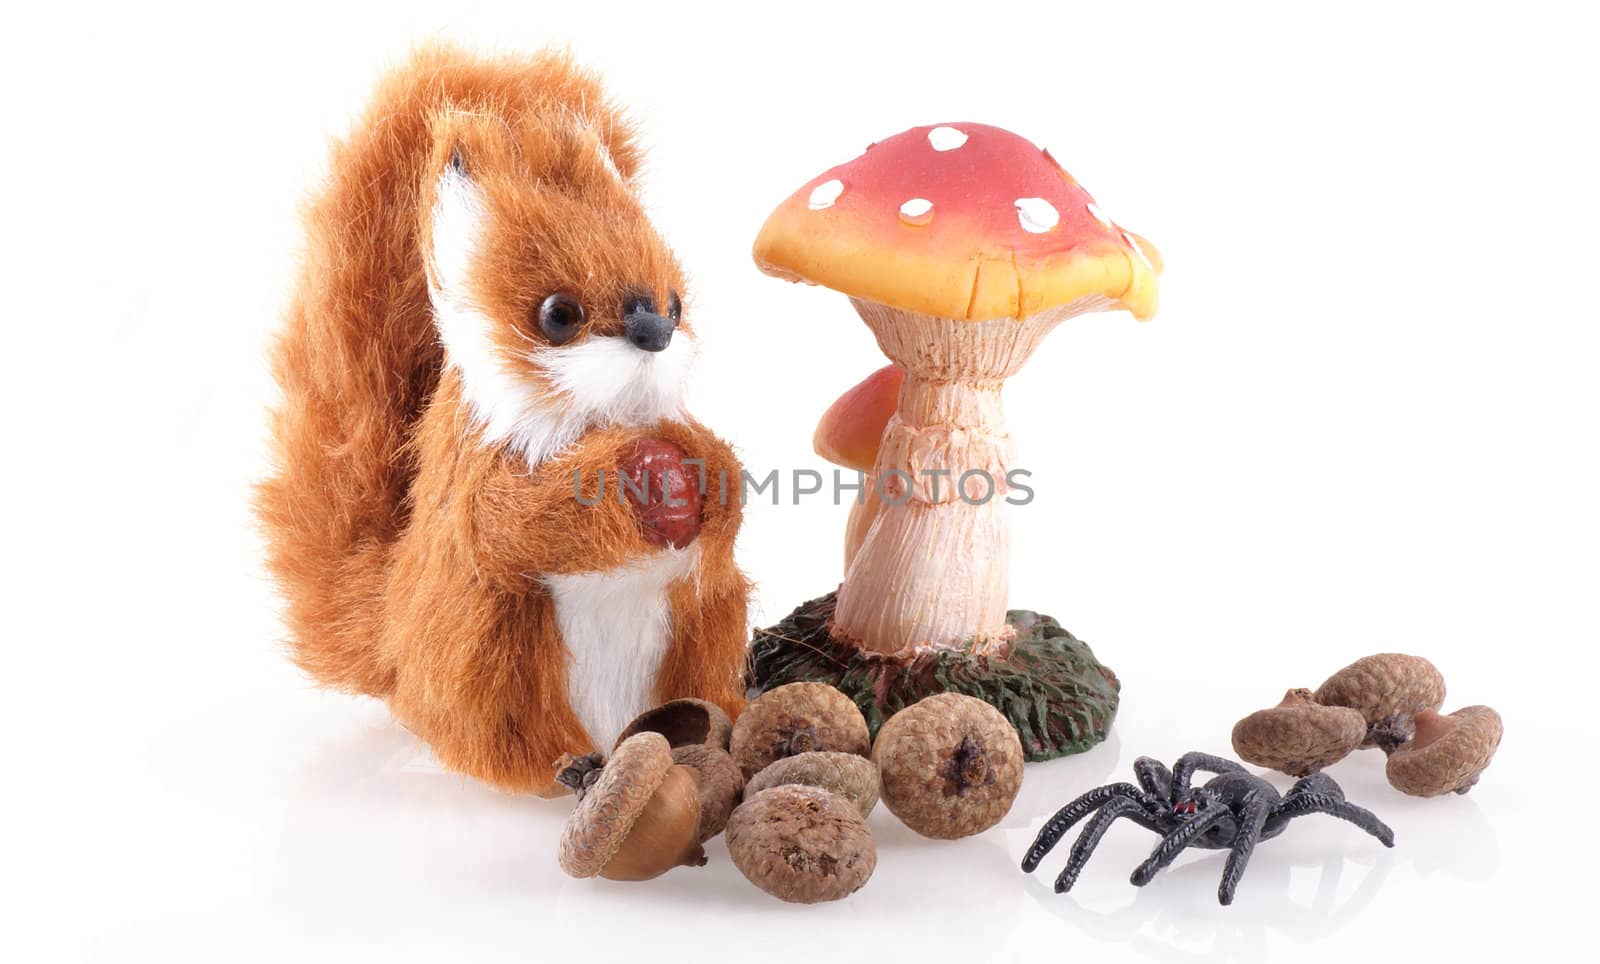 Squirrel, spider, toadstool and acorns on a white background.